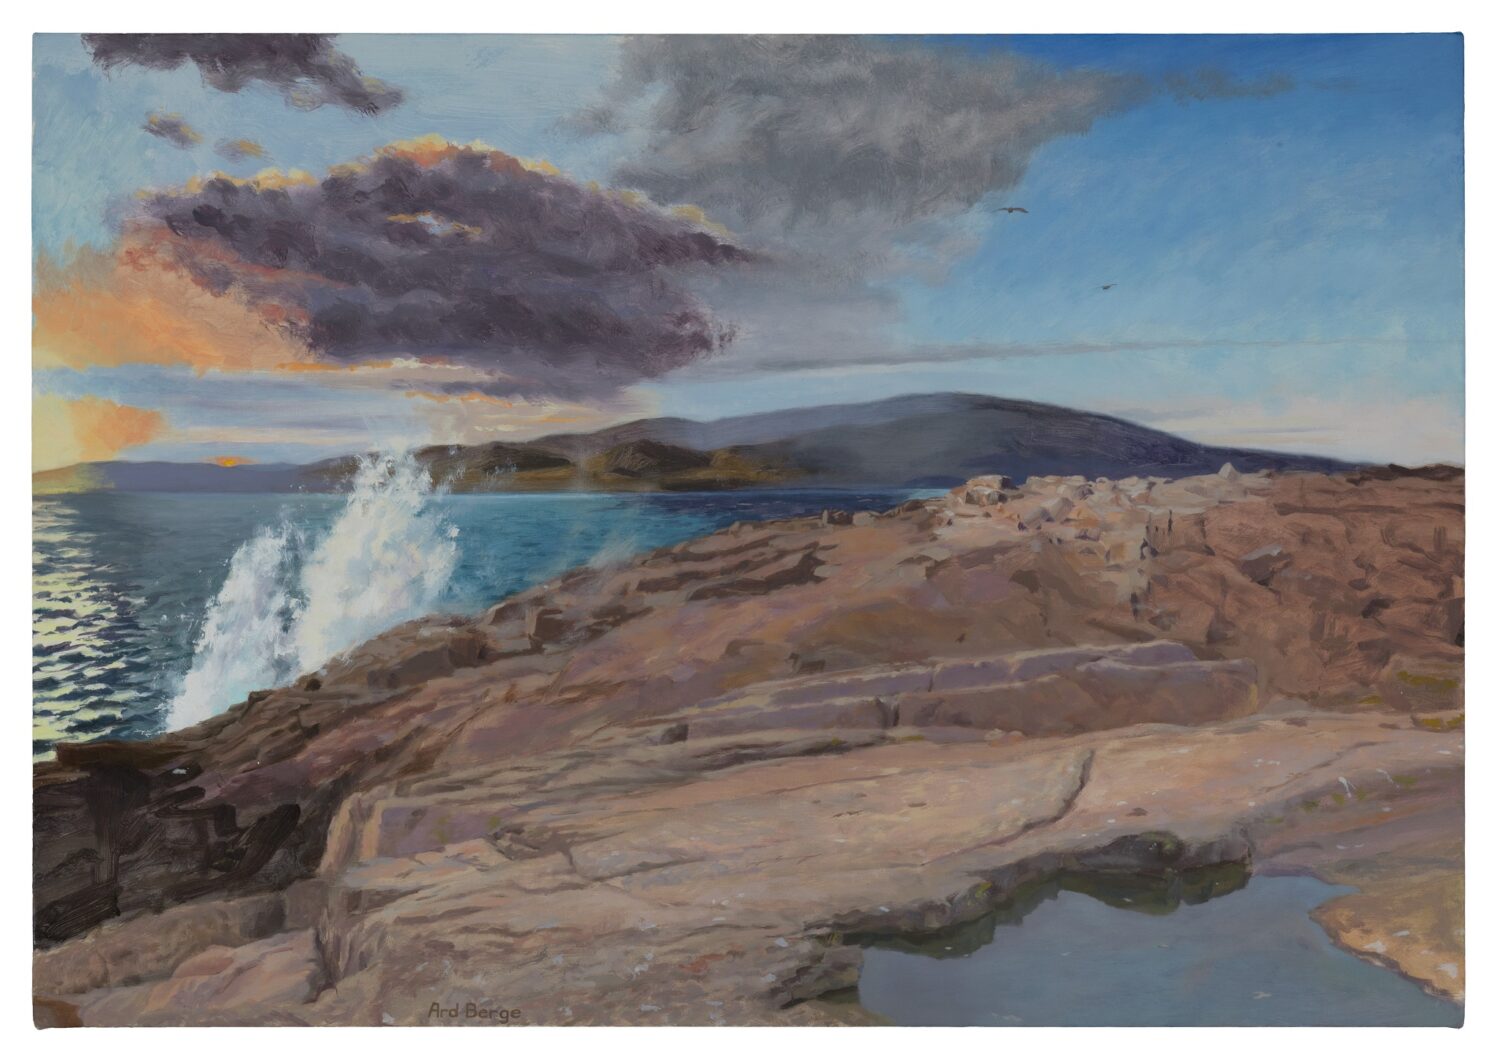 thumbnail of Oil on linen by Ard Berge titled Seven Days on Schoodic.